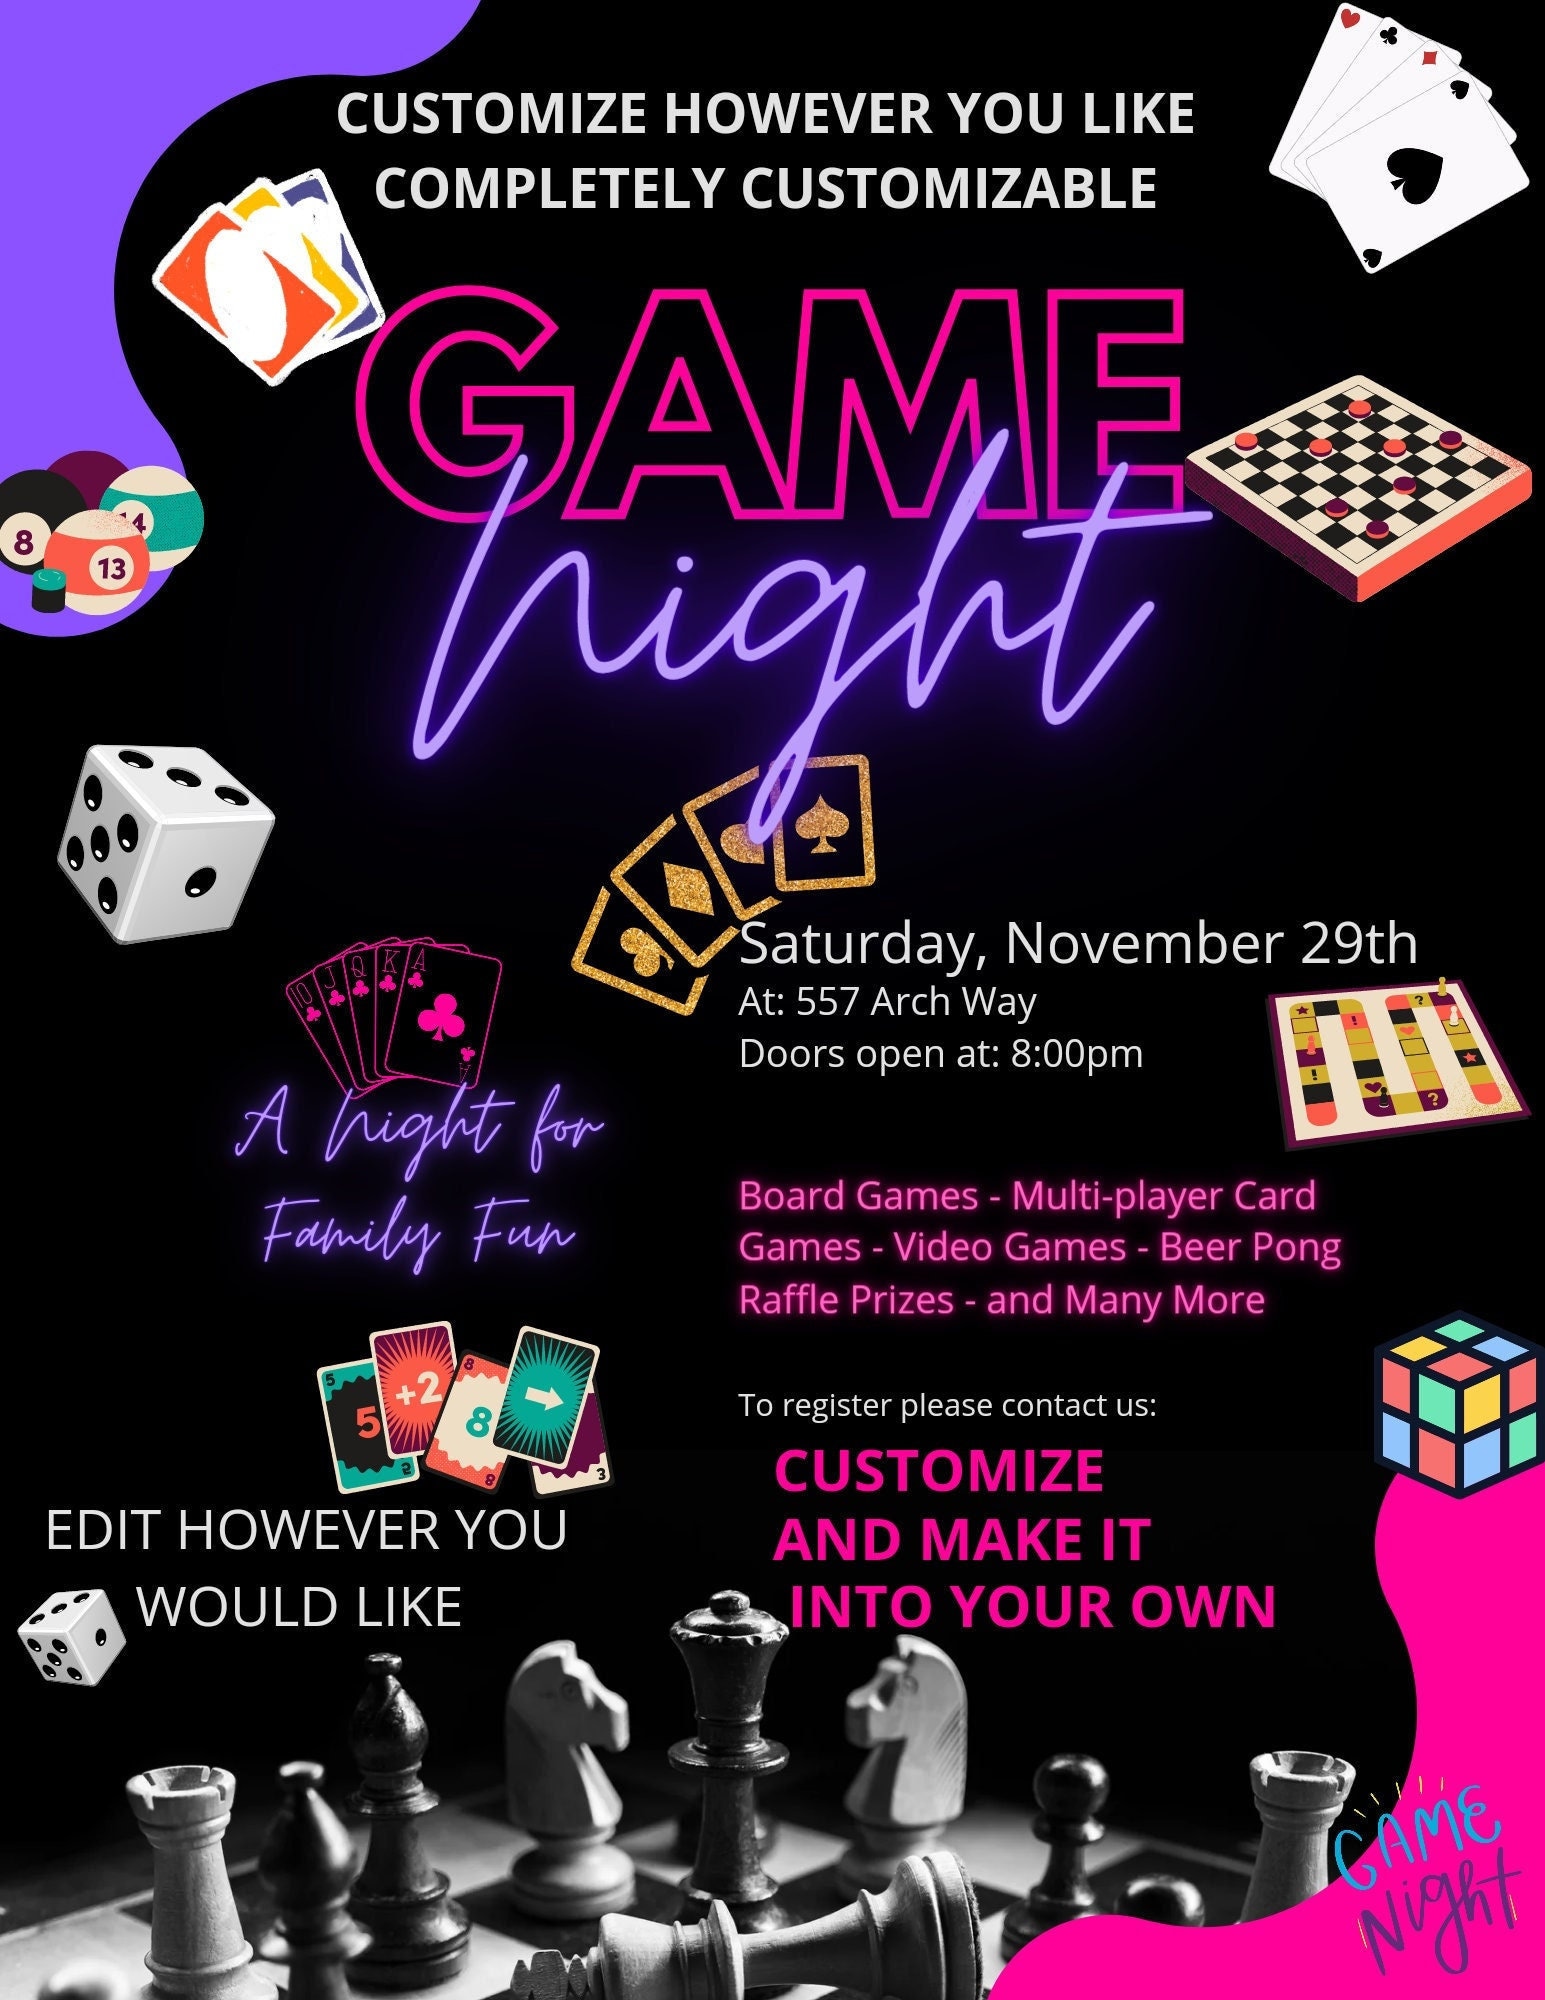 game-night-flyer-invitation-social-media-post-template-100-editable-you-can-customize-it